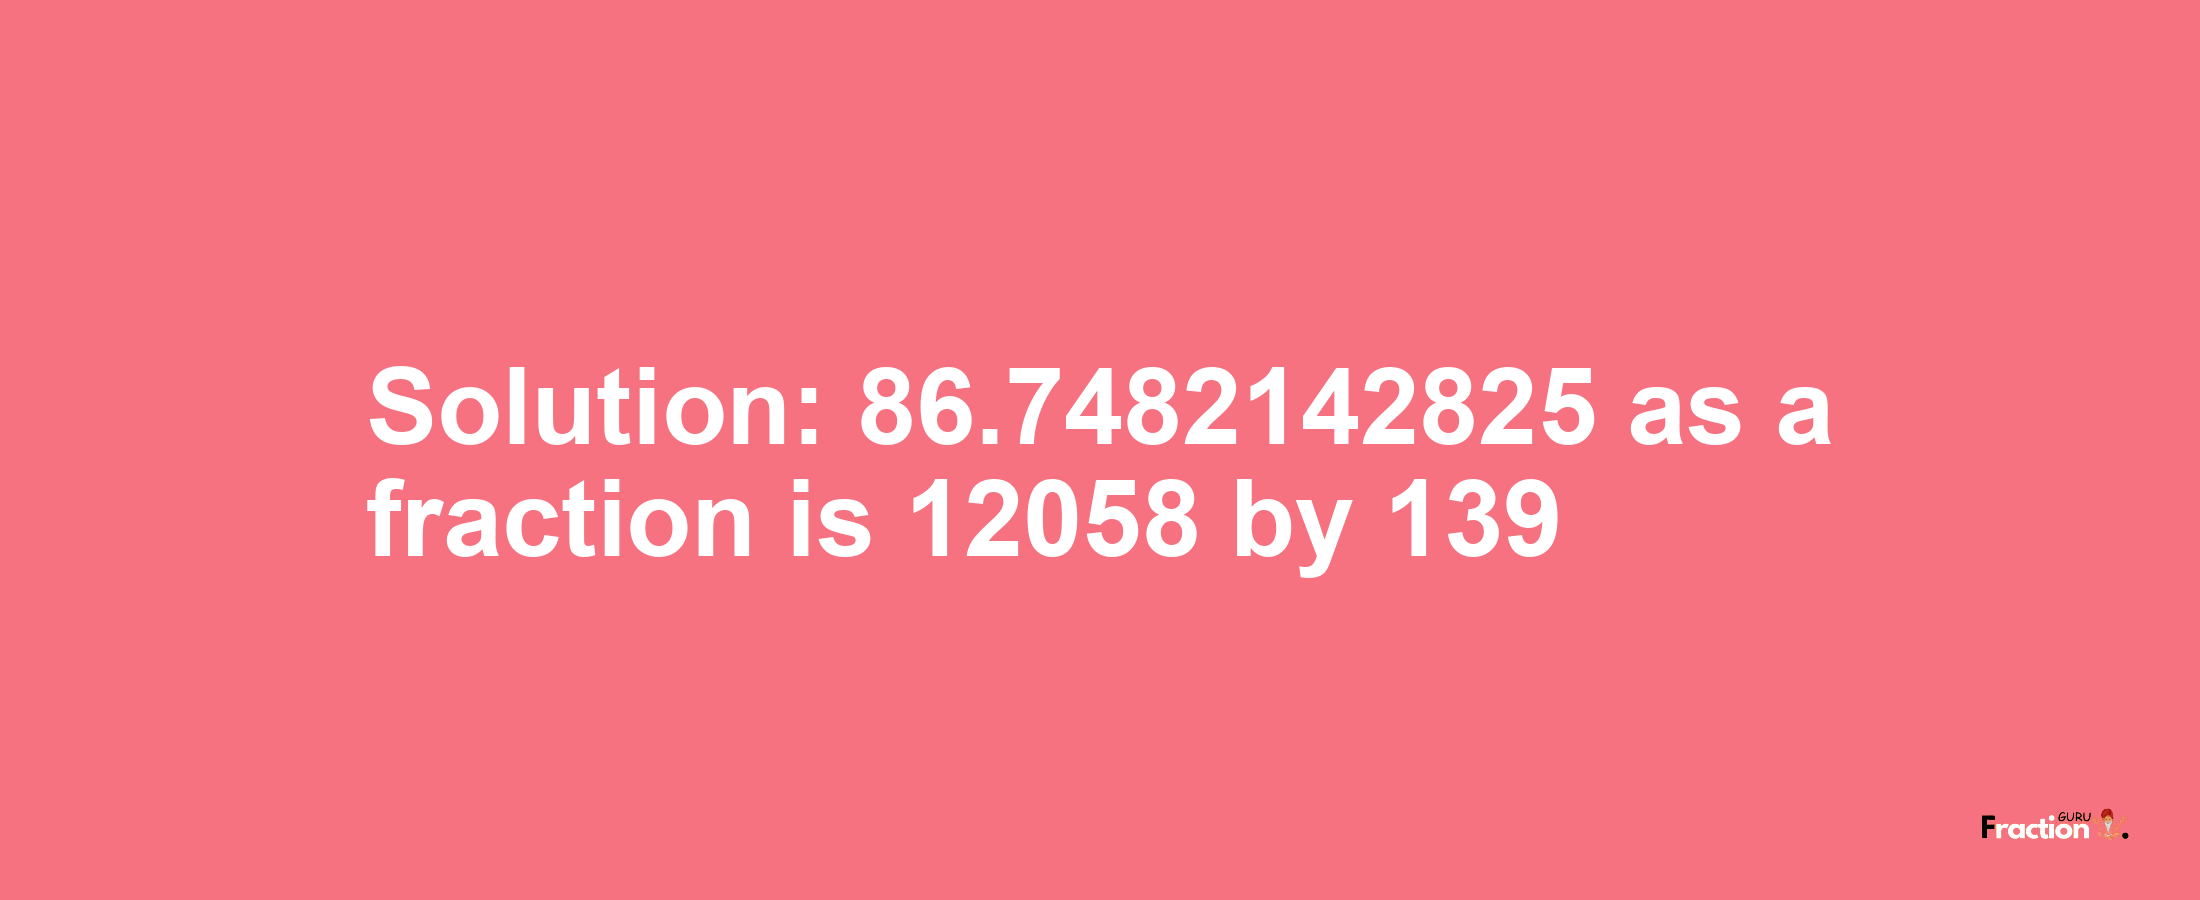 Solution:86.7482142825 as a fraction is 12058/139